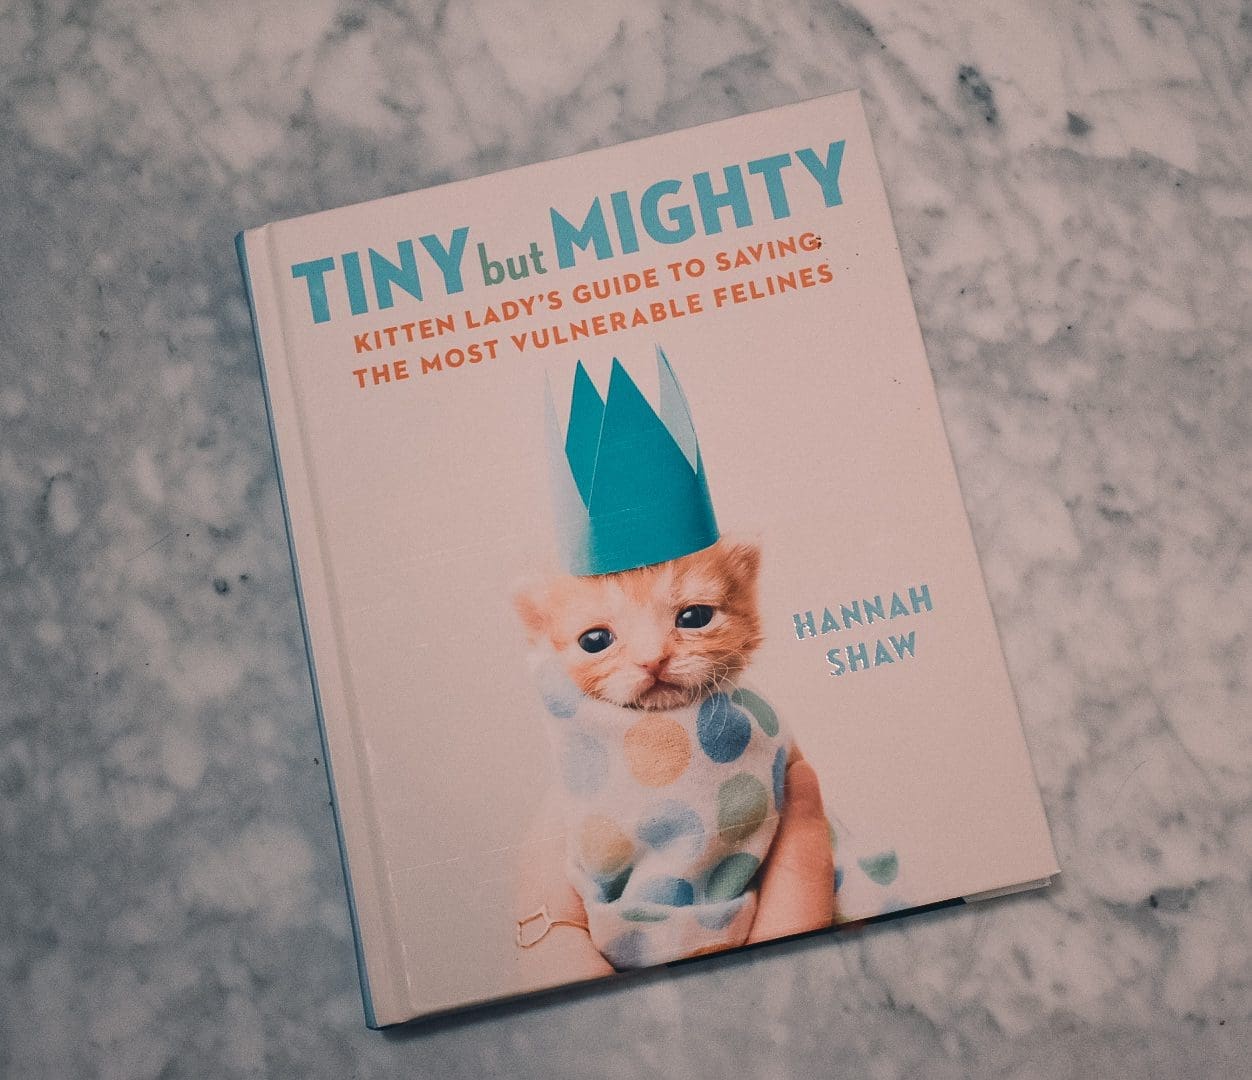 Kitten Lady Hannah Shaw On 'Tiny But Mighty,' Her Guide To At-Risk Cat Care  : NPR